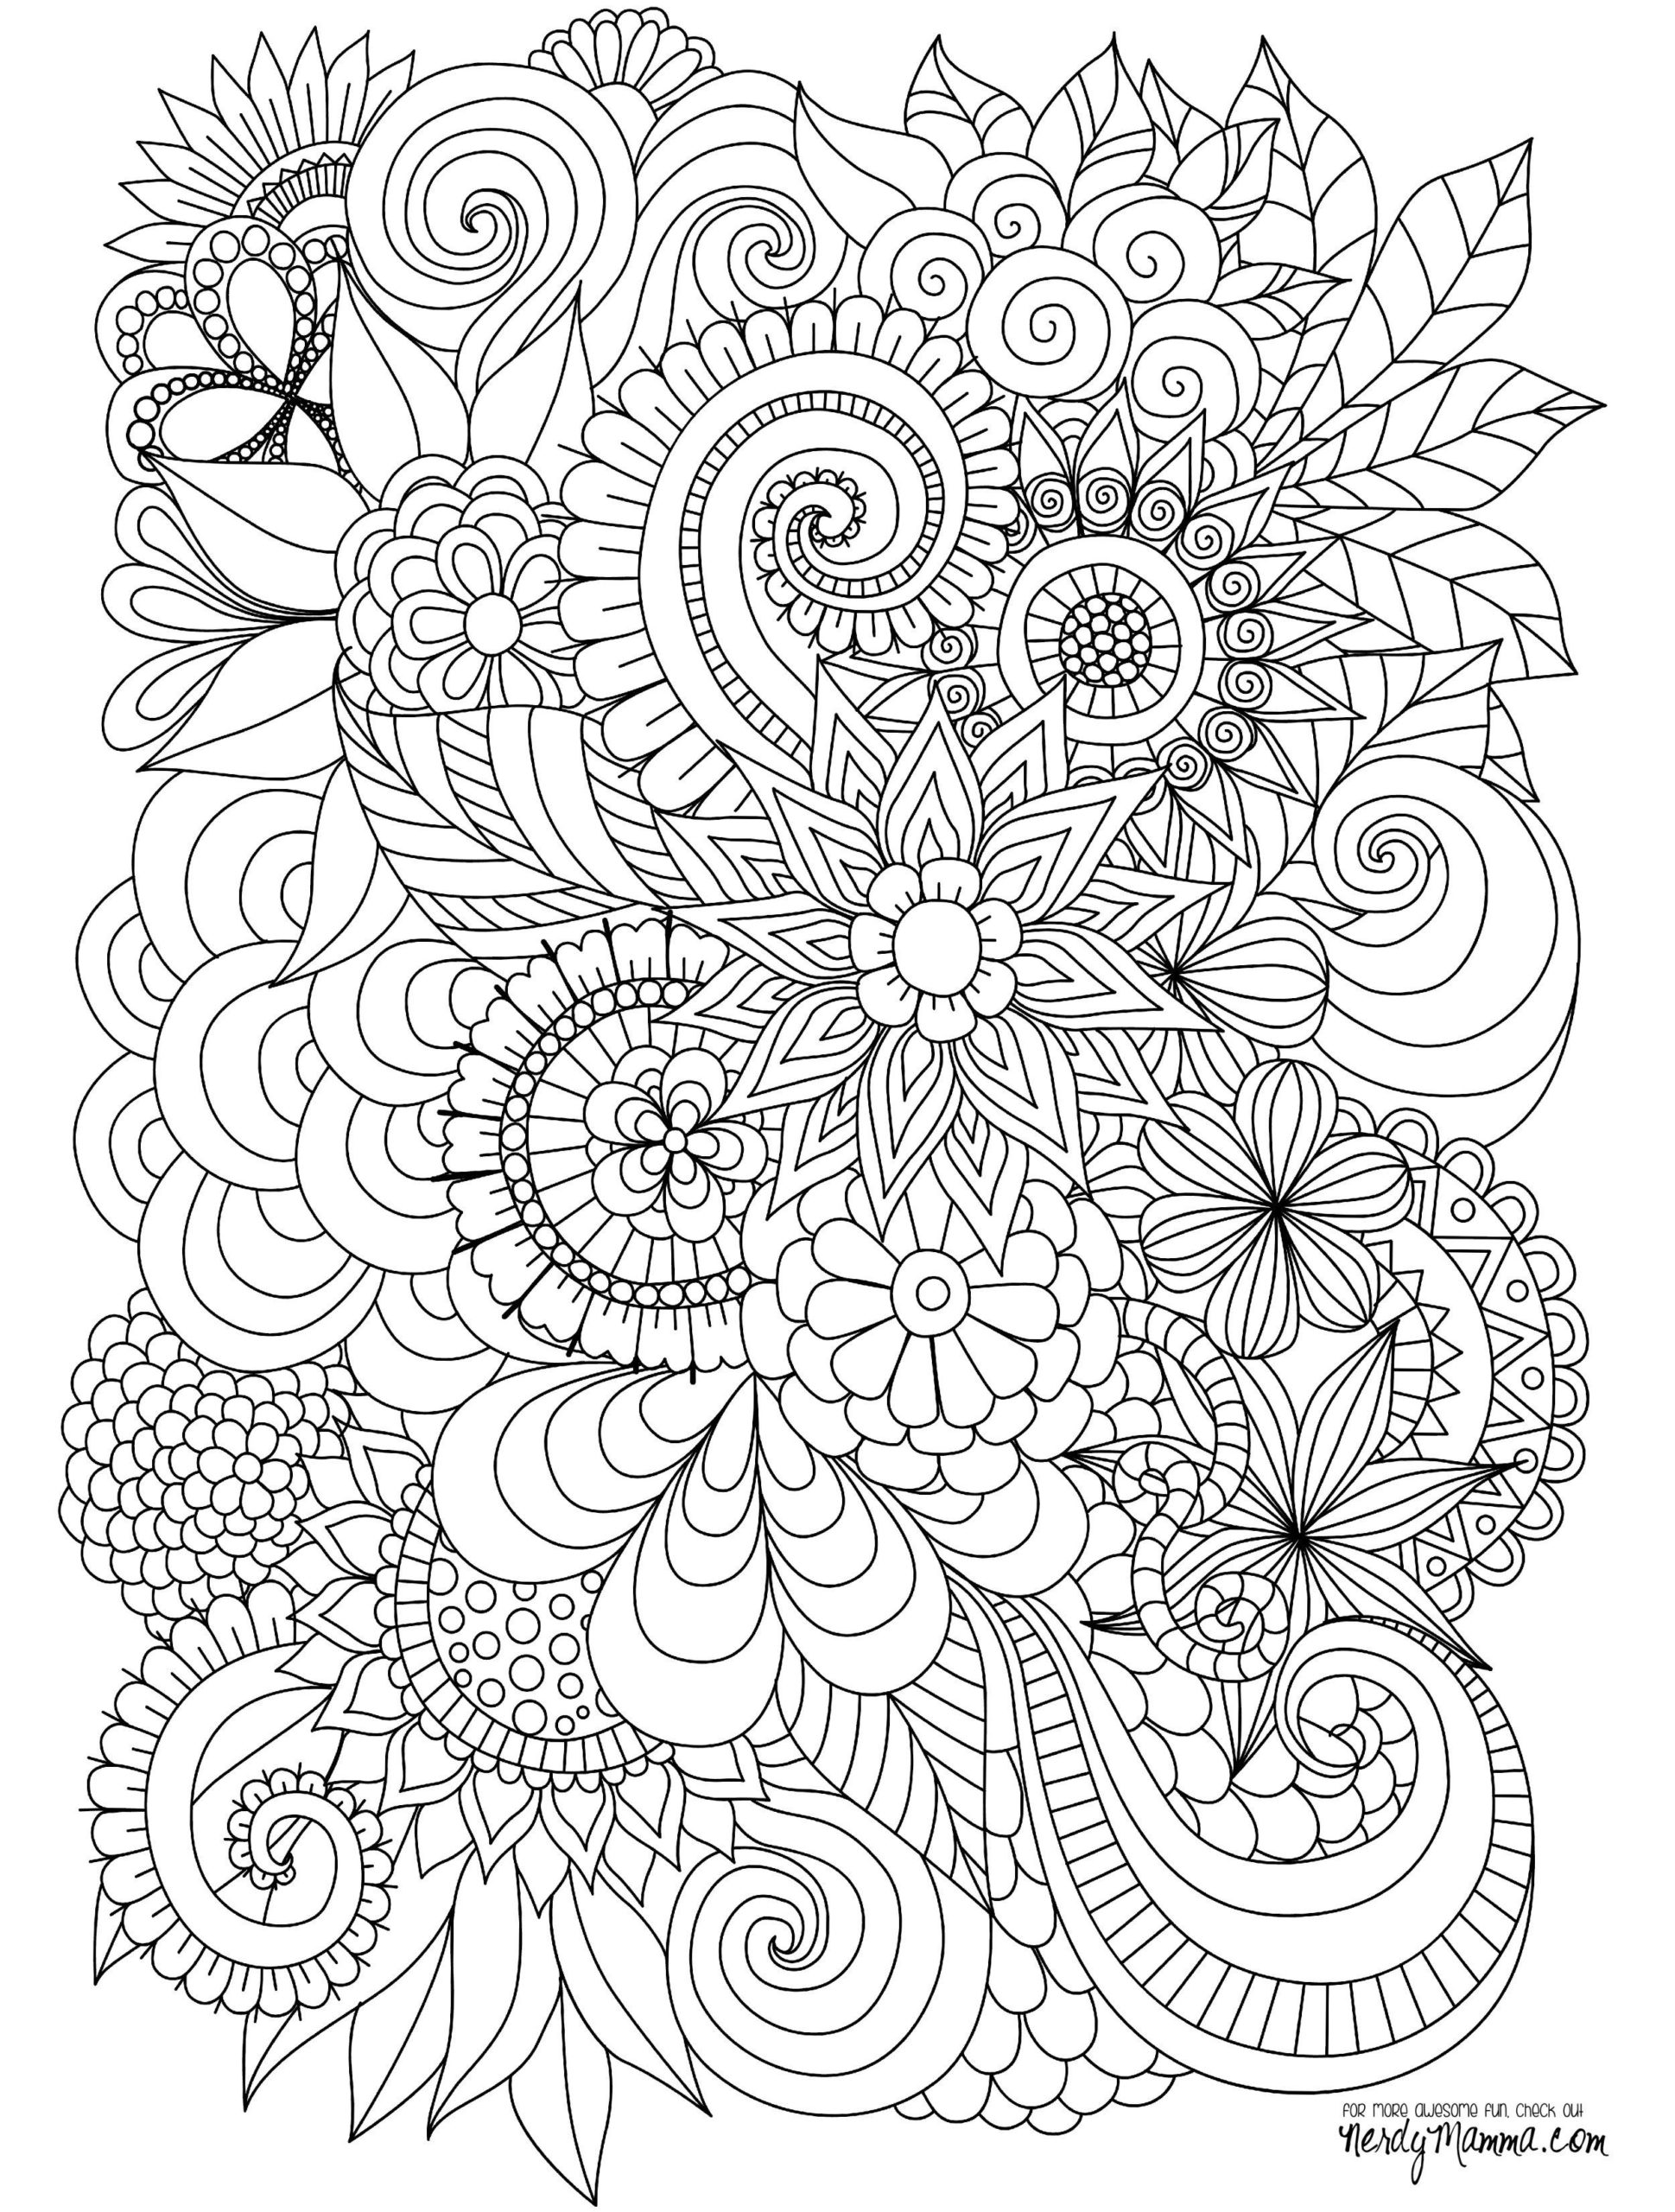 Coloring Book  Zentangle Coloring Pages Fun Time Free ...